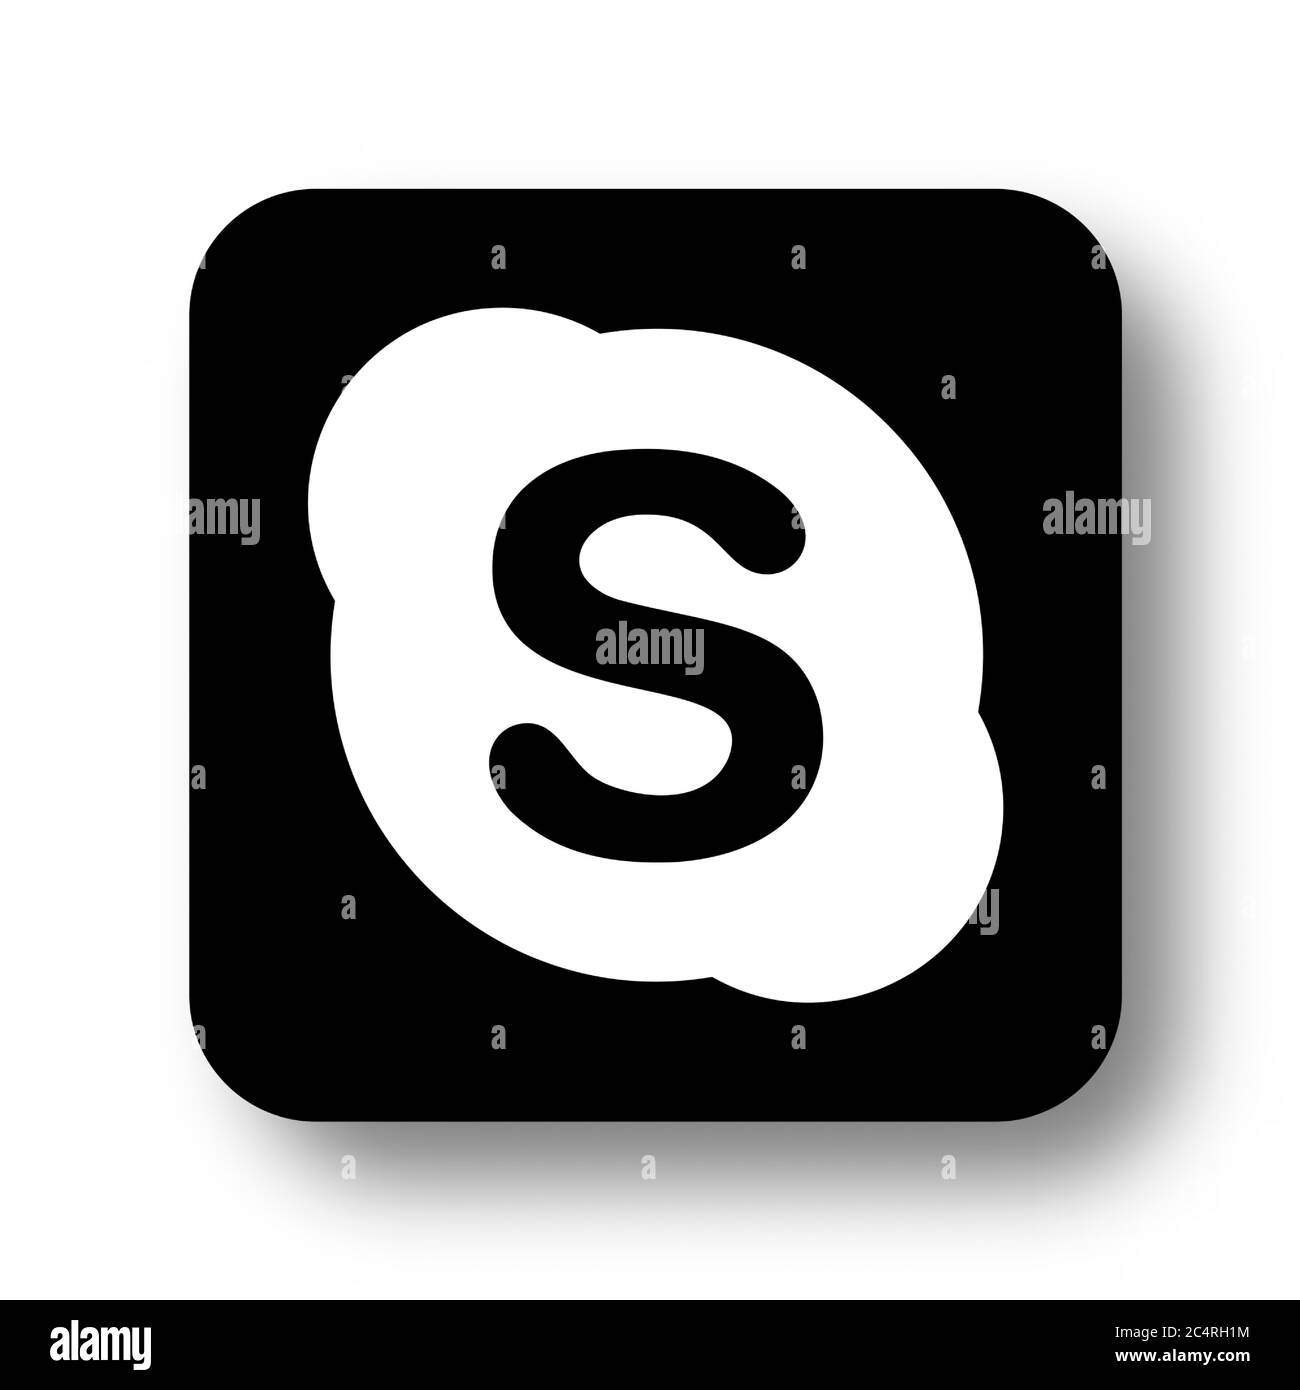 VORONEZH, RUSSIA - JANUARY 31, 2020: Skype logo black square icon with soft shadow Stock Vector